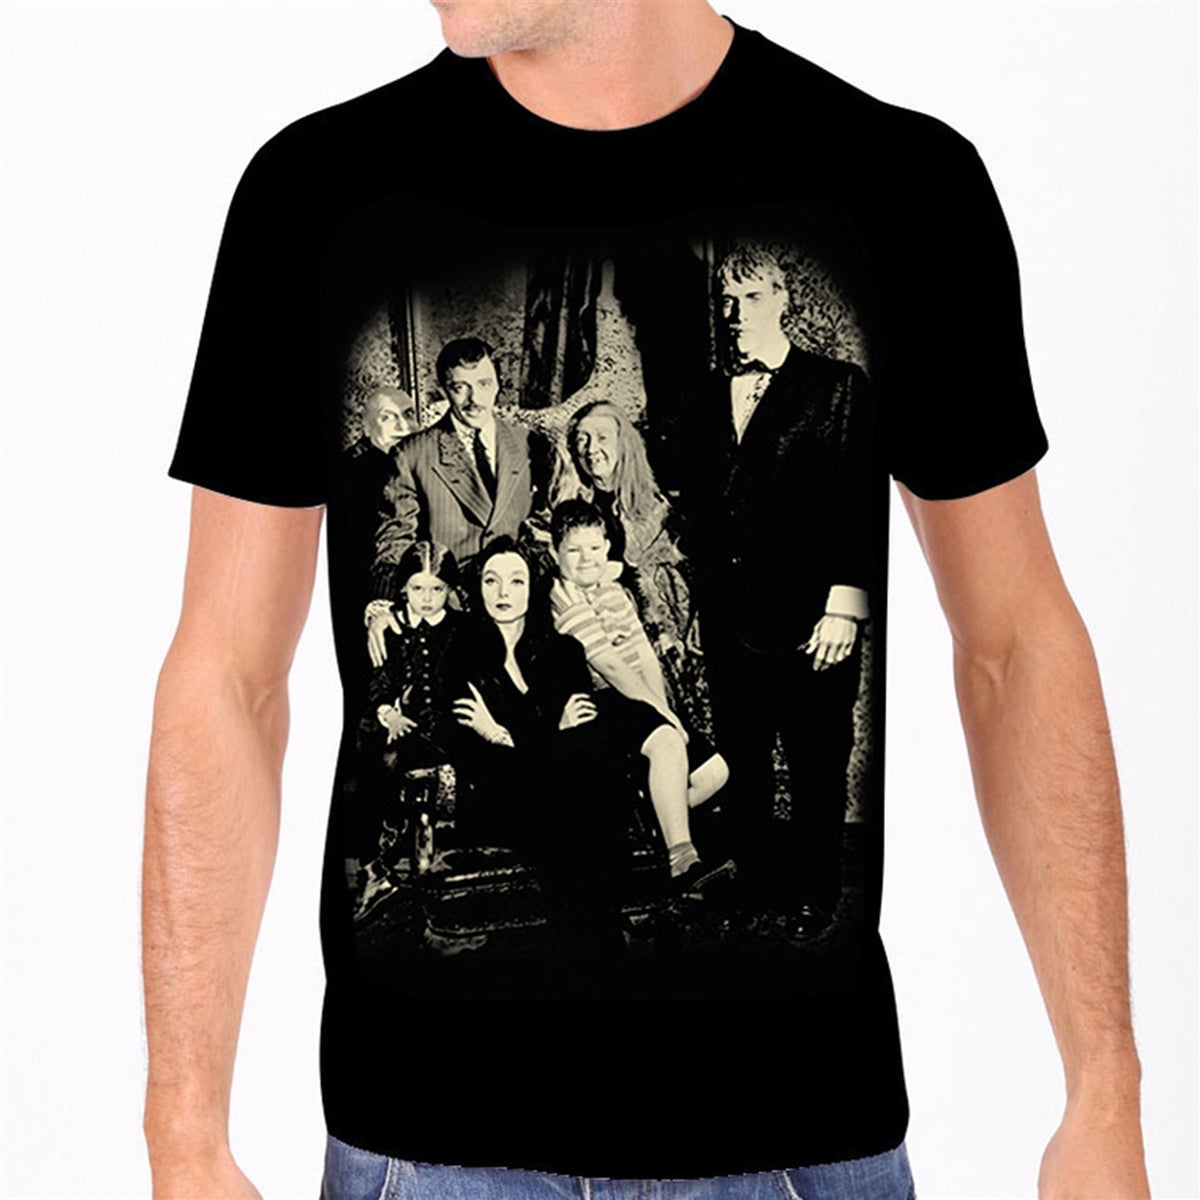 men's sizing fitted black t-shirt featuring the cast of 60s TV show, The Addams Family in off-white, shown on model